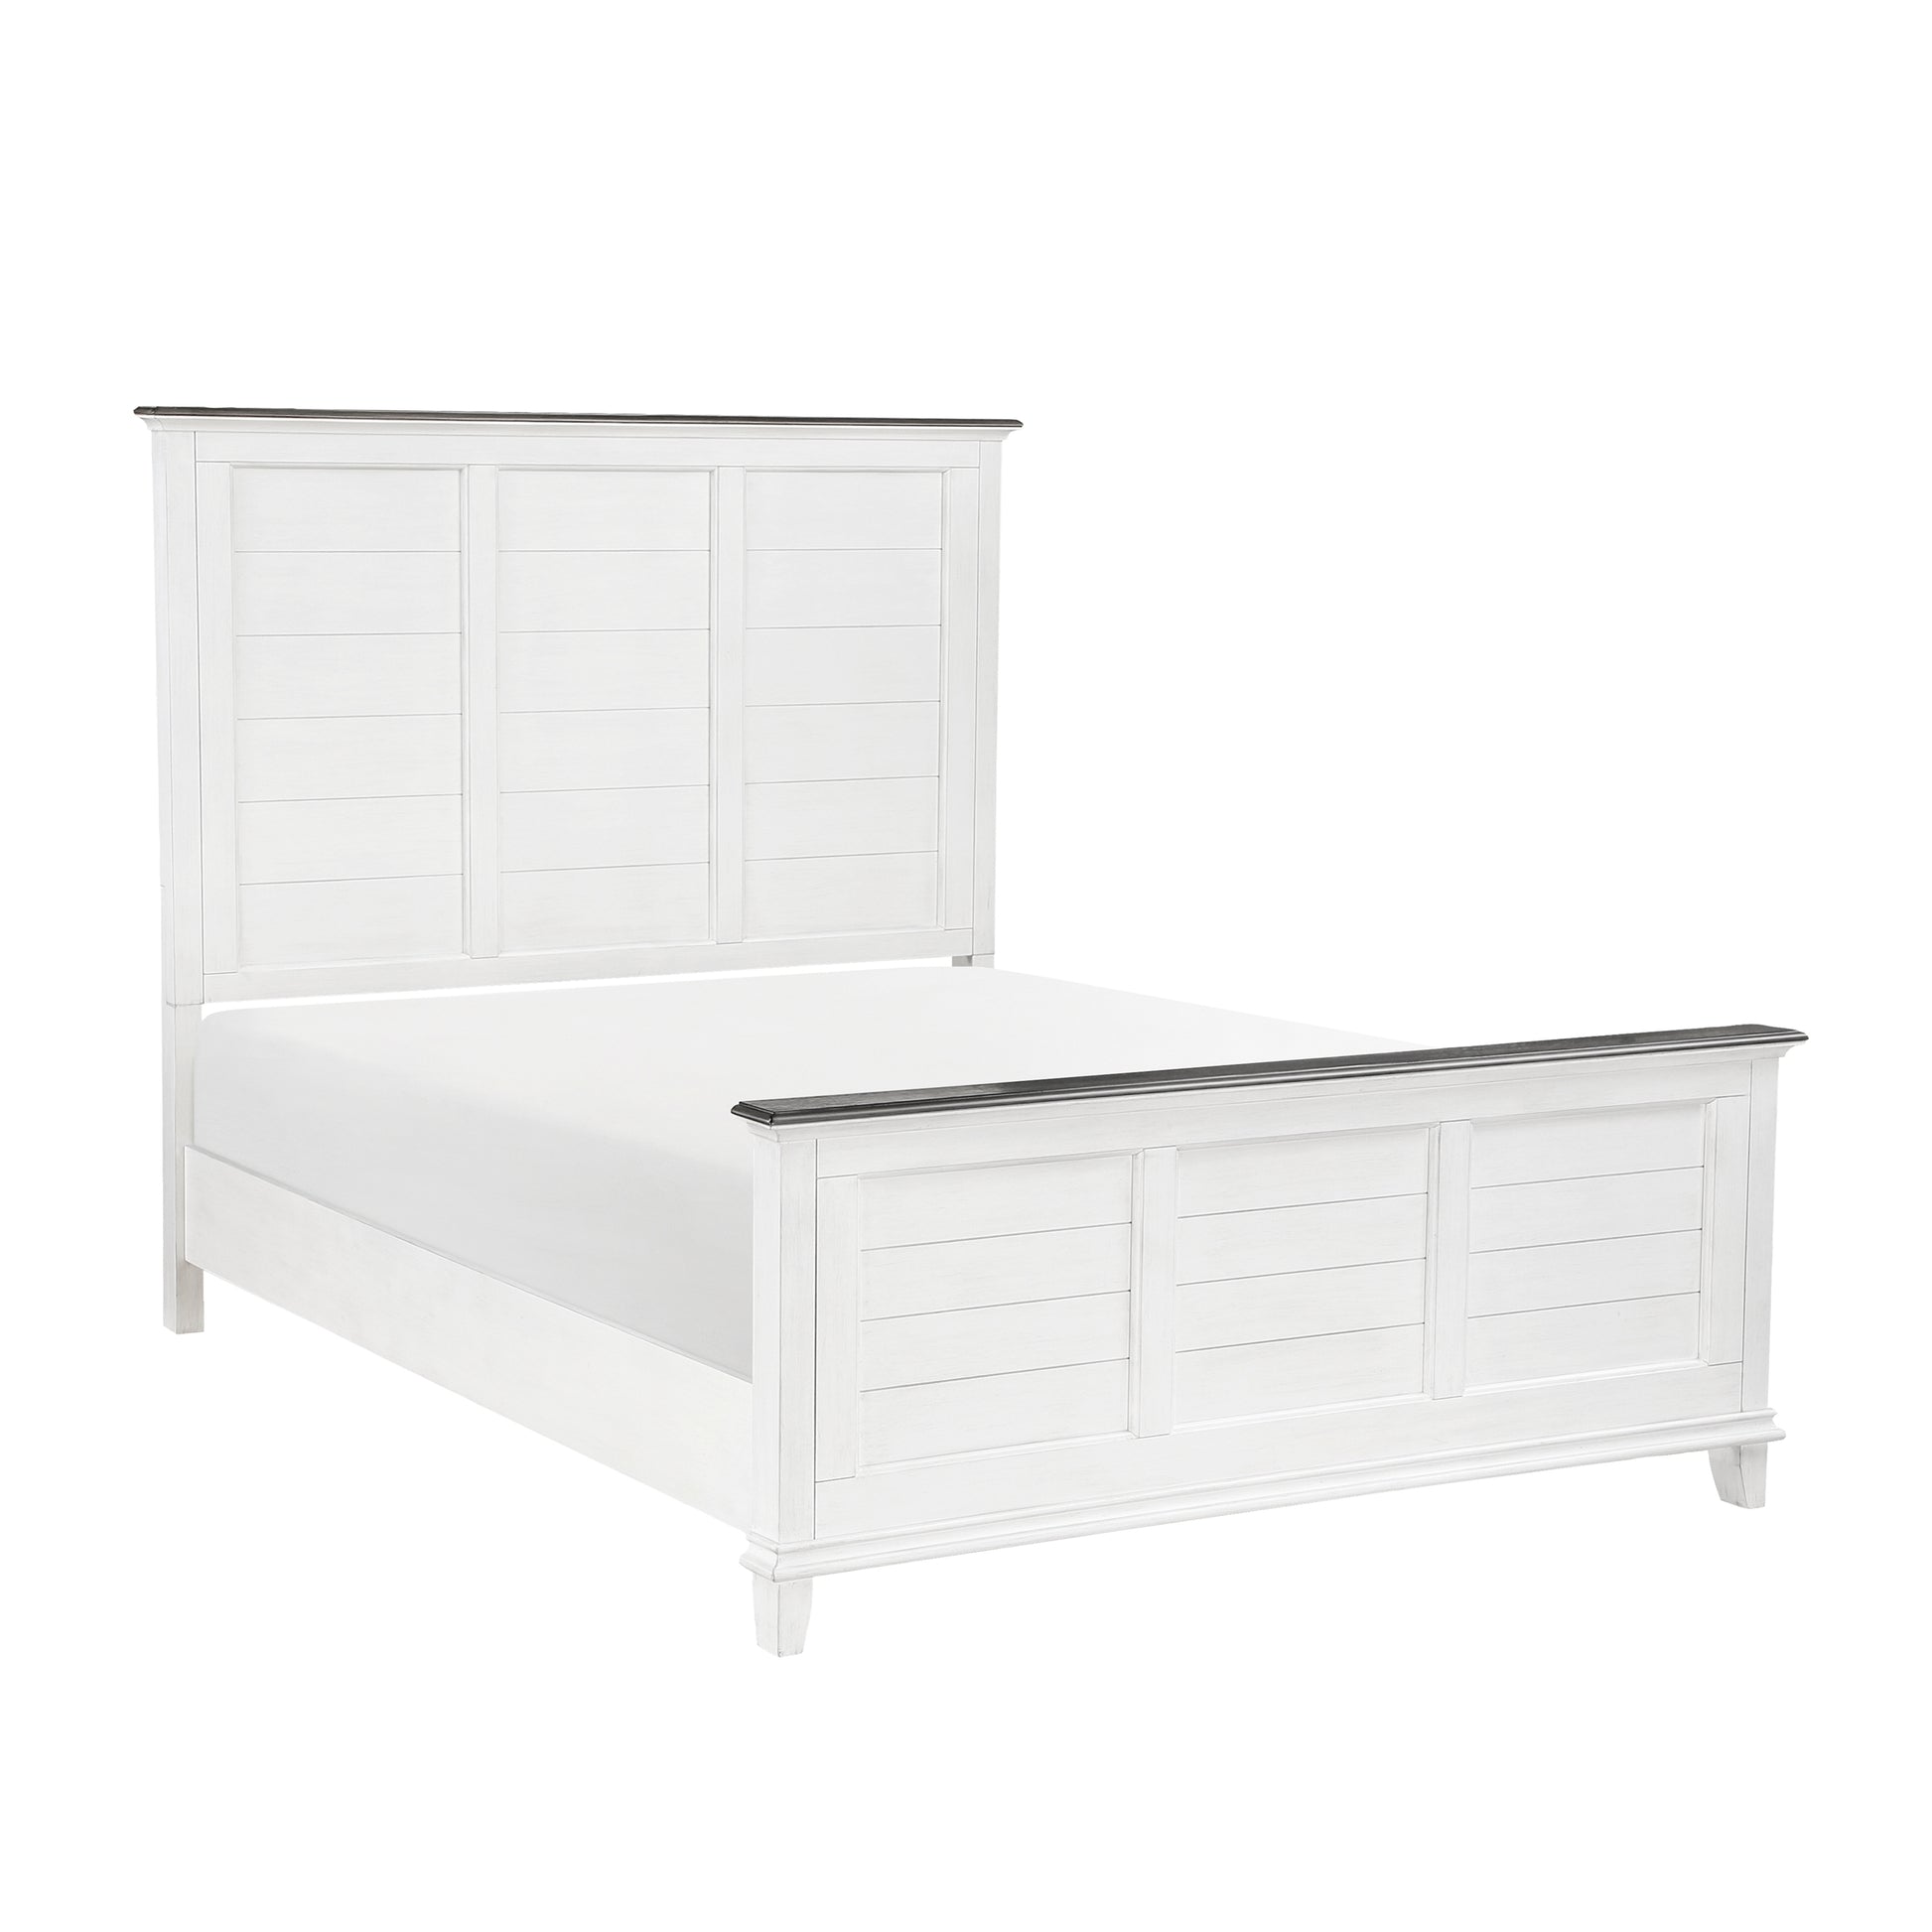 Homelegance Chesterton Queen Bed In White